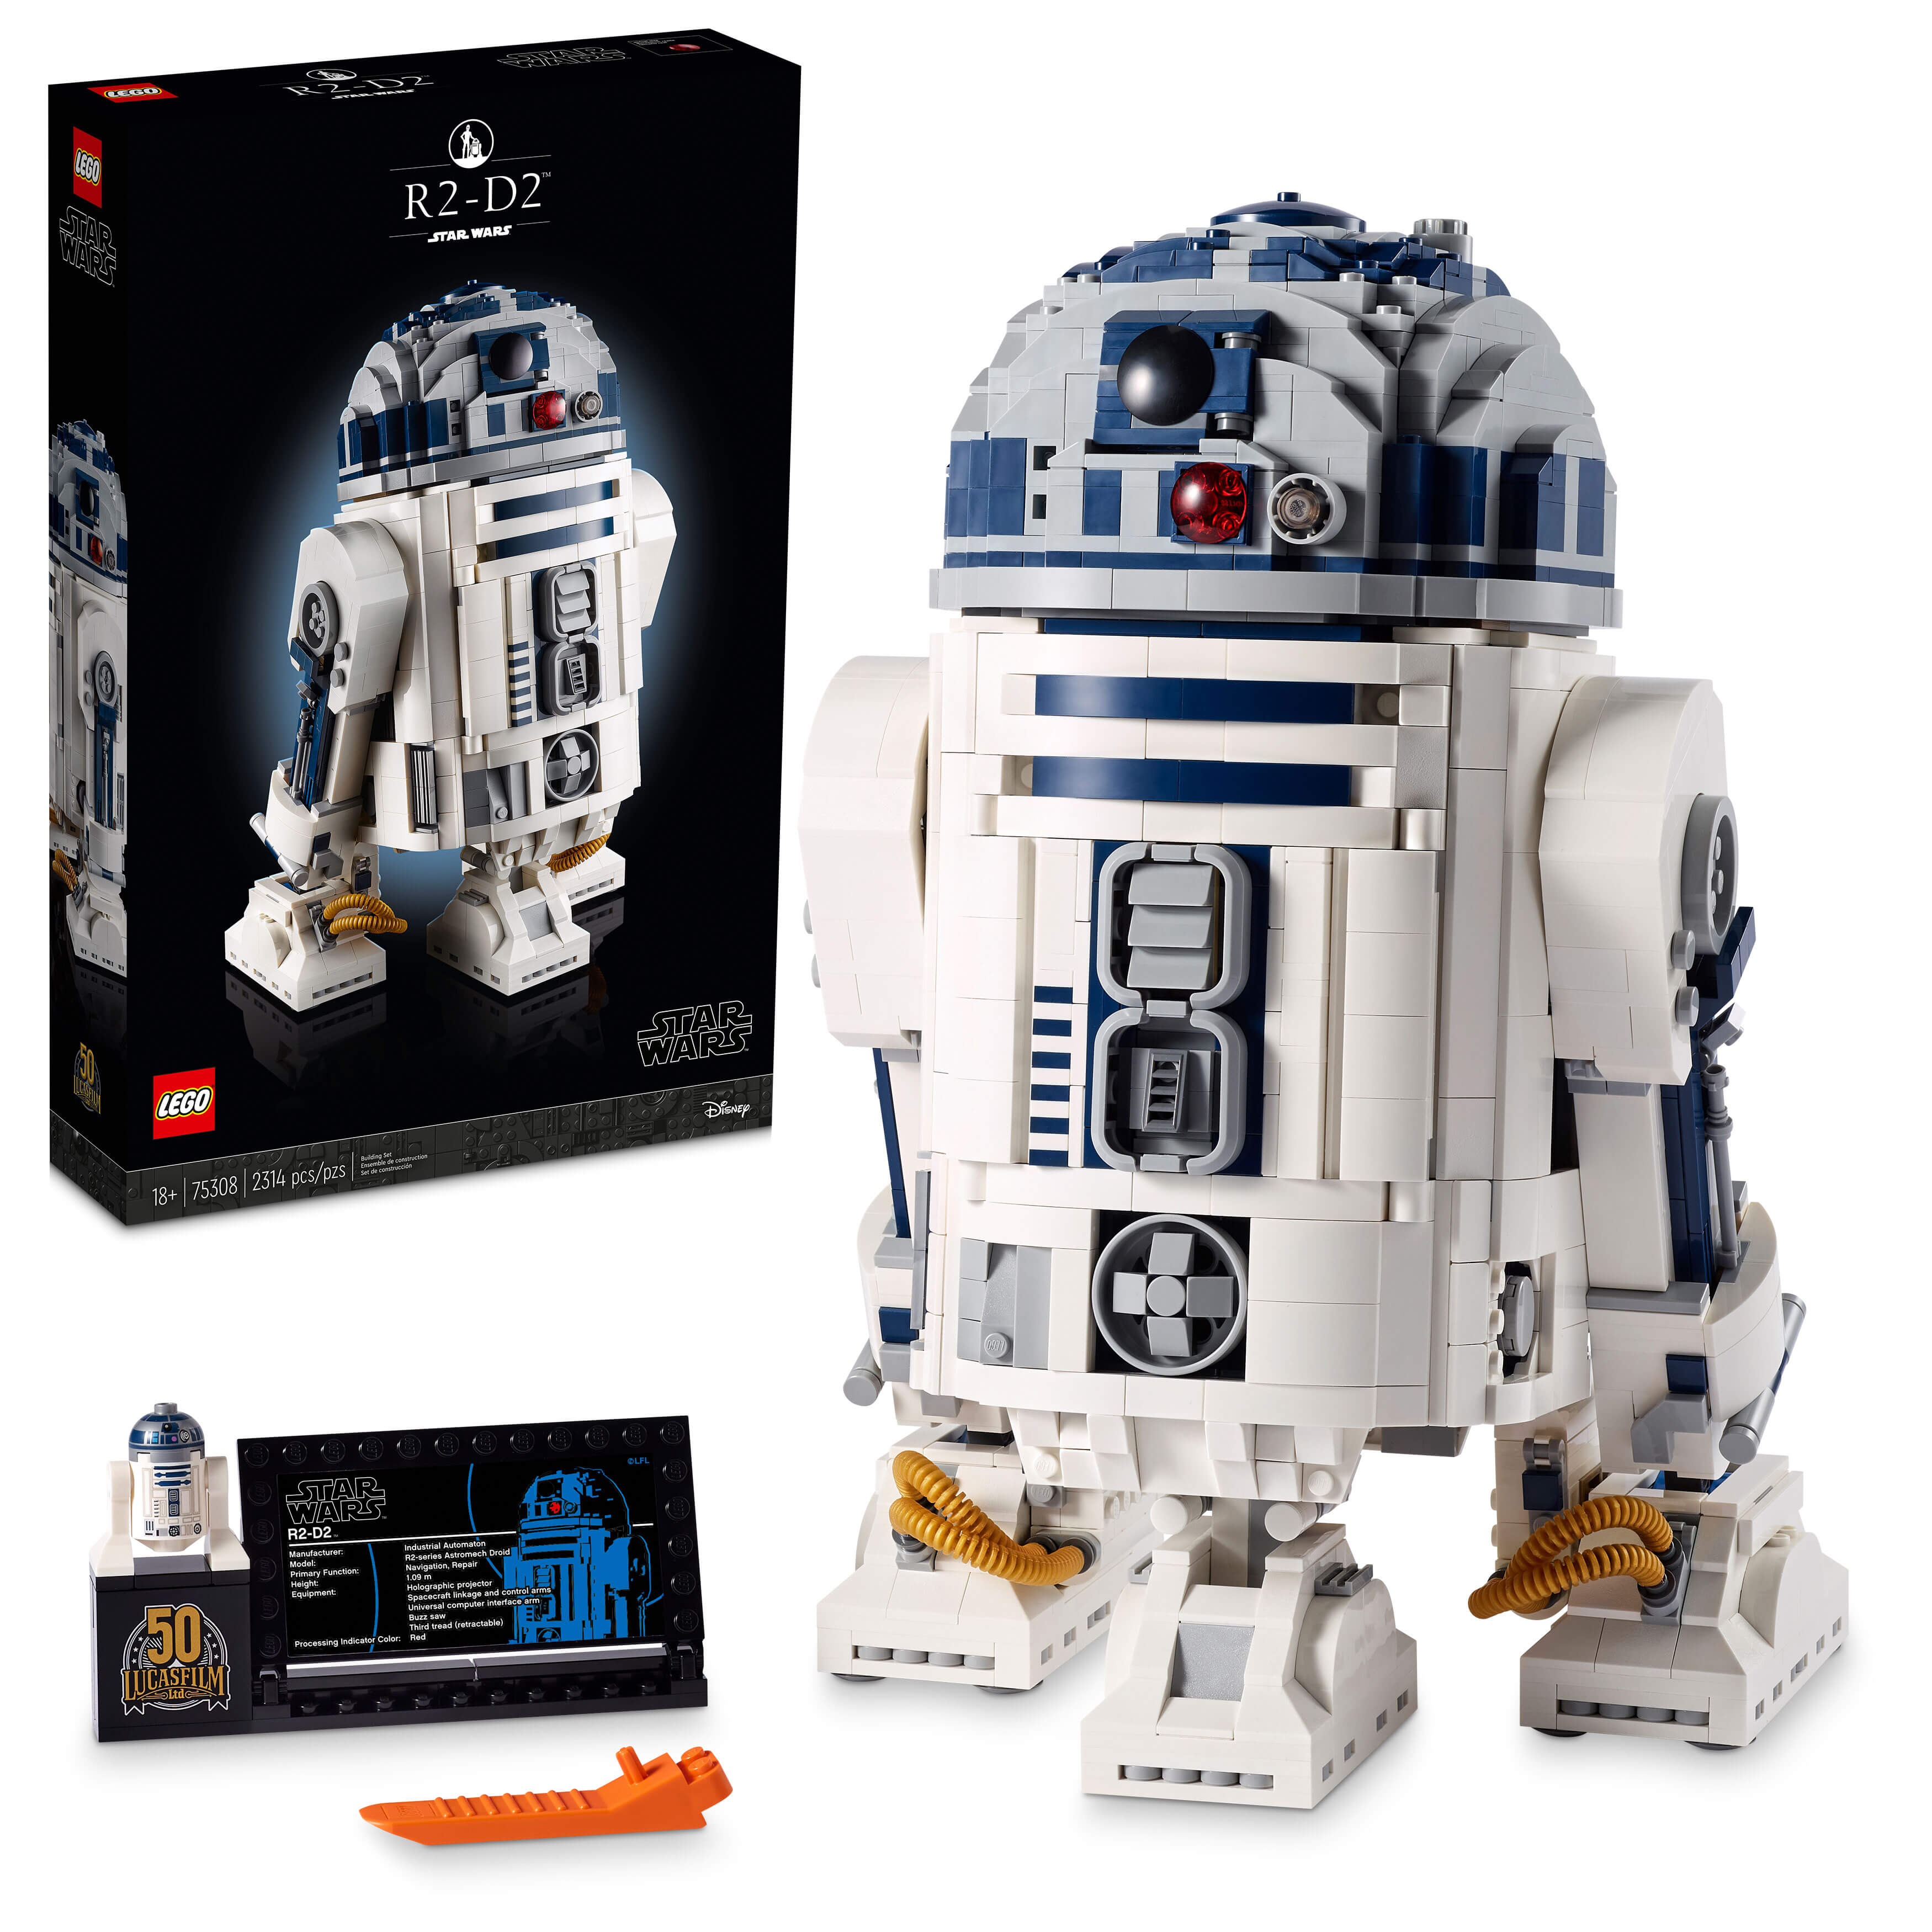 LEGO® Star Wars® R2-D2 75308 Collectible Building Kit (2,315 Pieces)